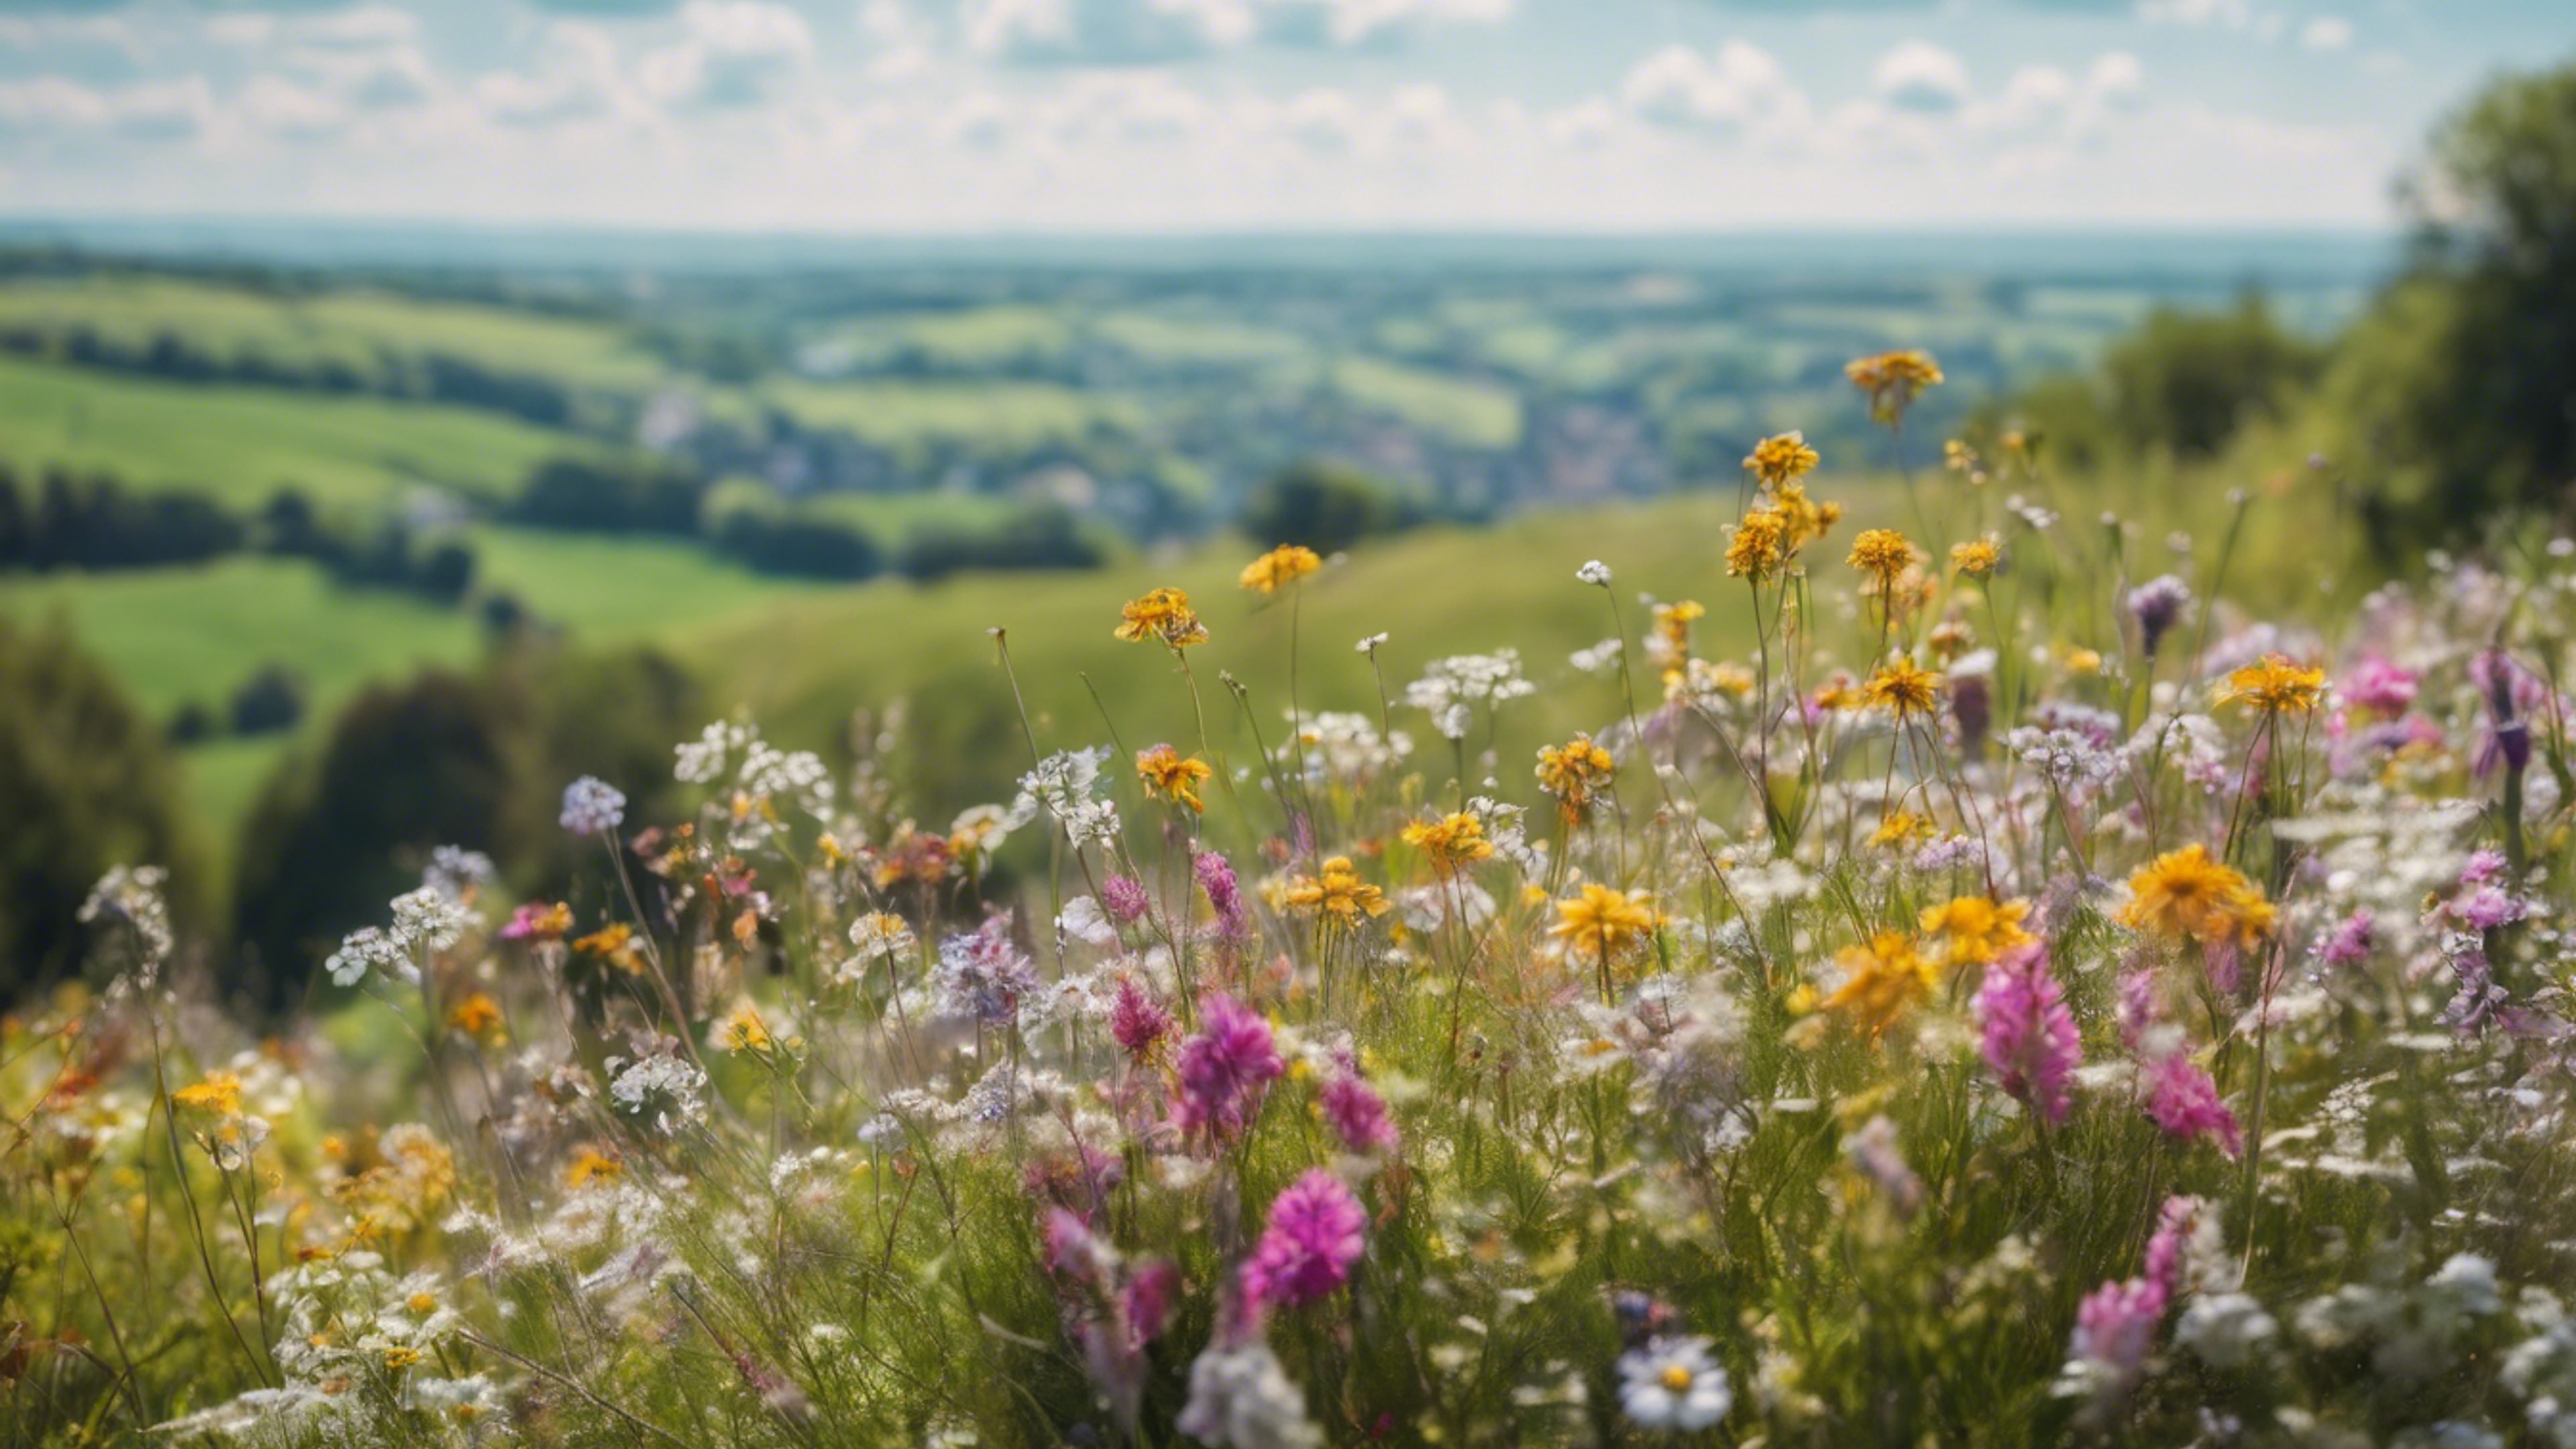 A hill view with an impressionistic array of wild spring flowers.壁紙[c7a37809b91a468c8871]